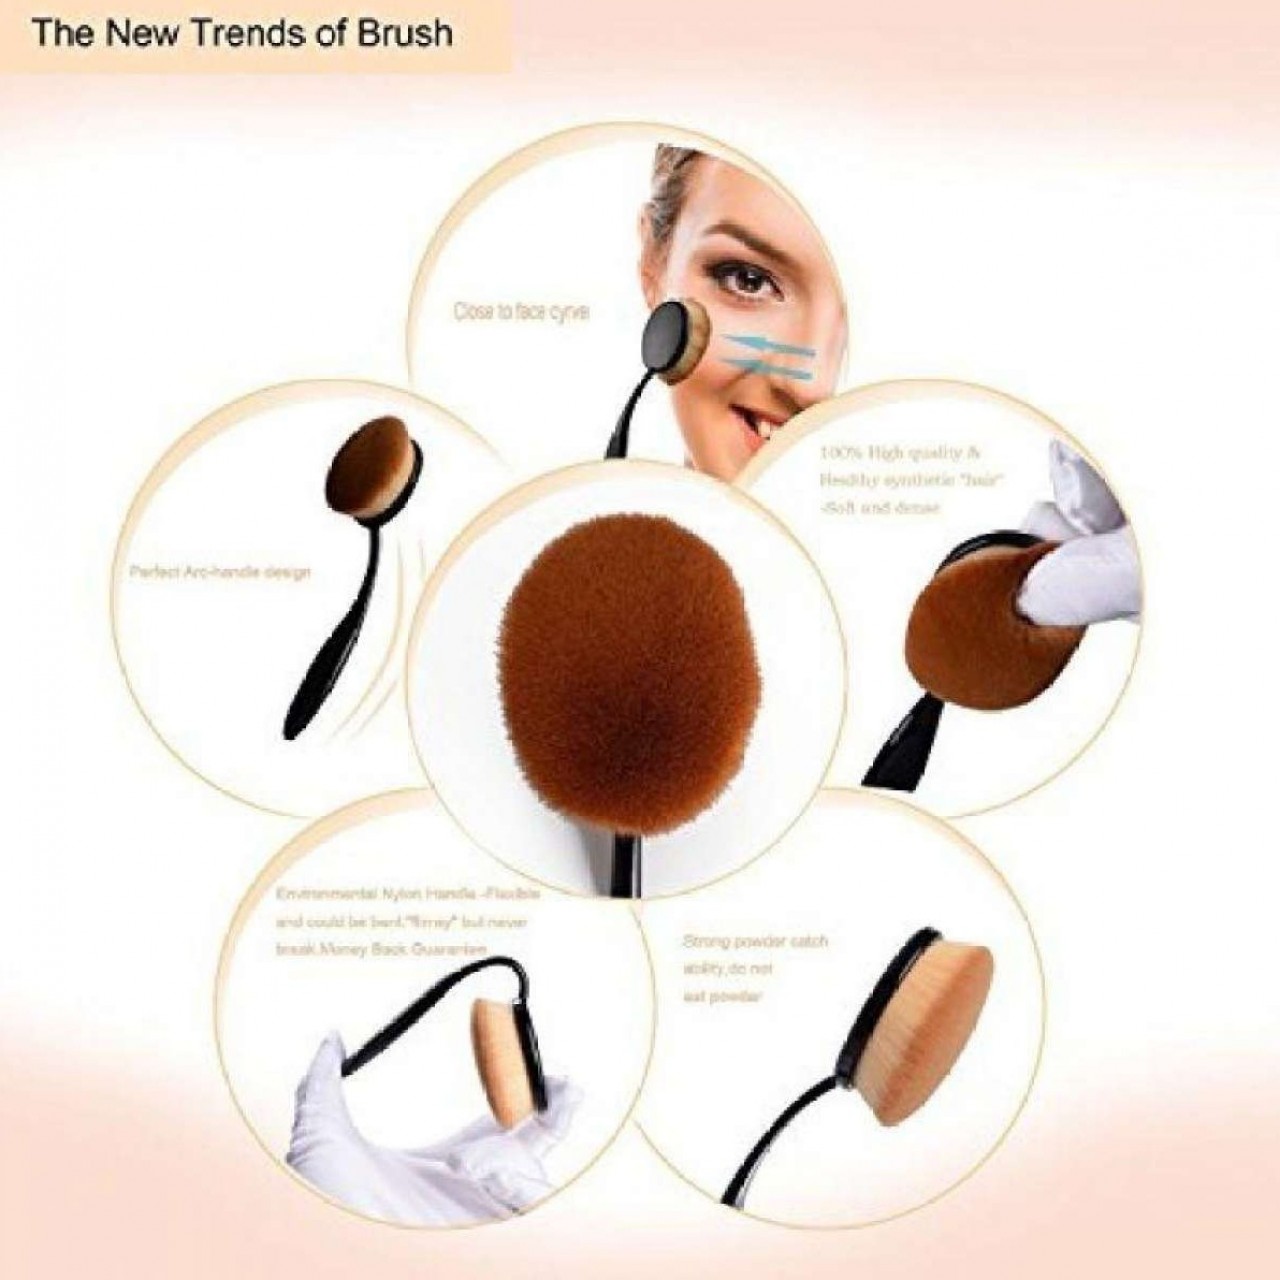 Pack of 2 Pro Oval Make Up Brush